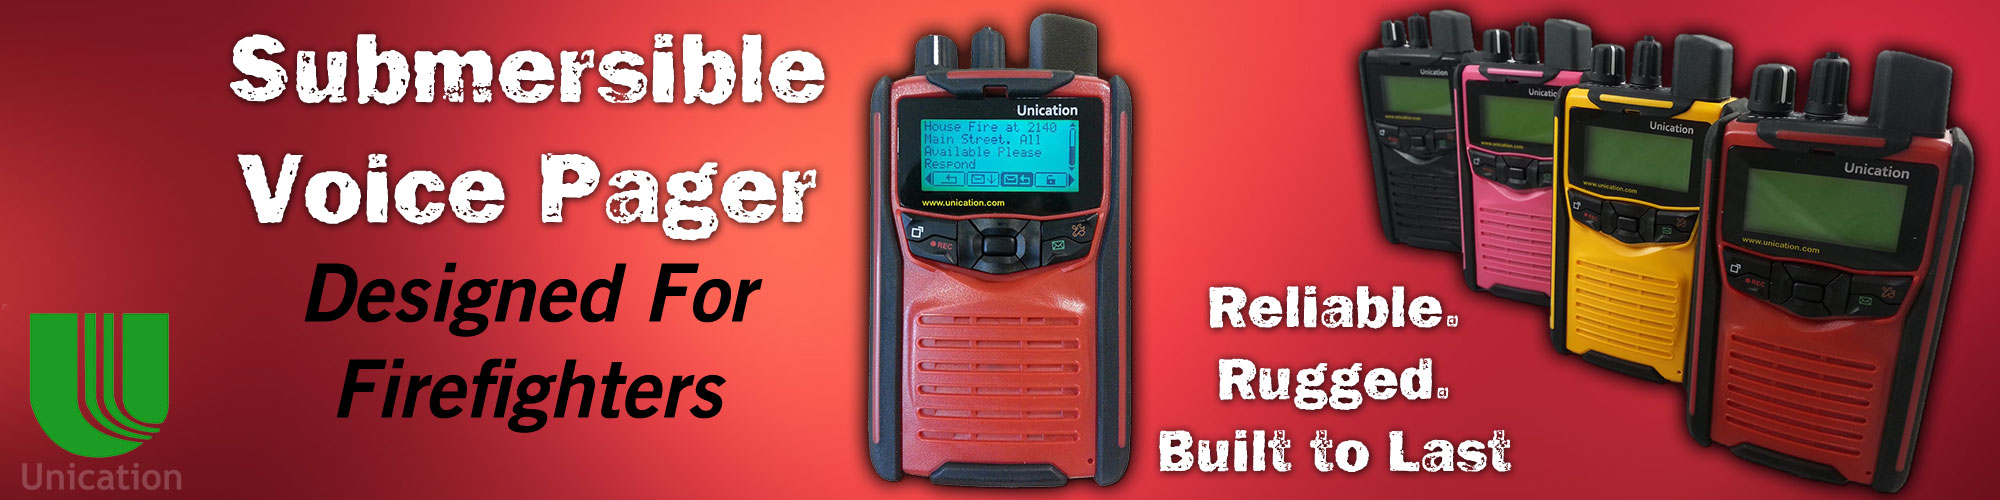 Submersible Voice Pager from Bay Electronics in Wisconsin